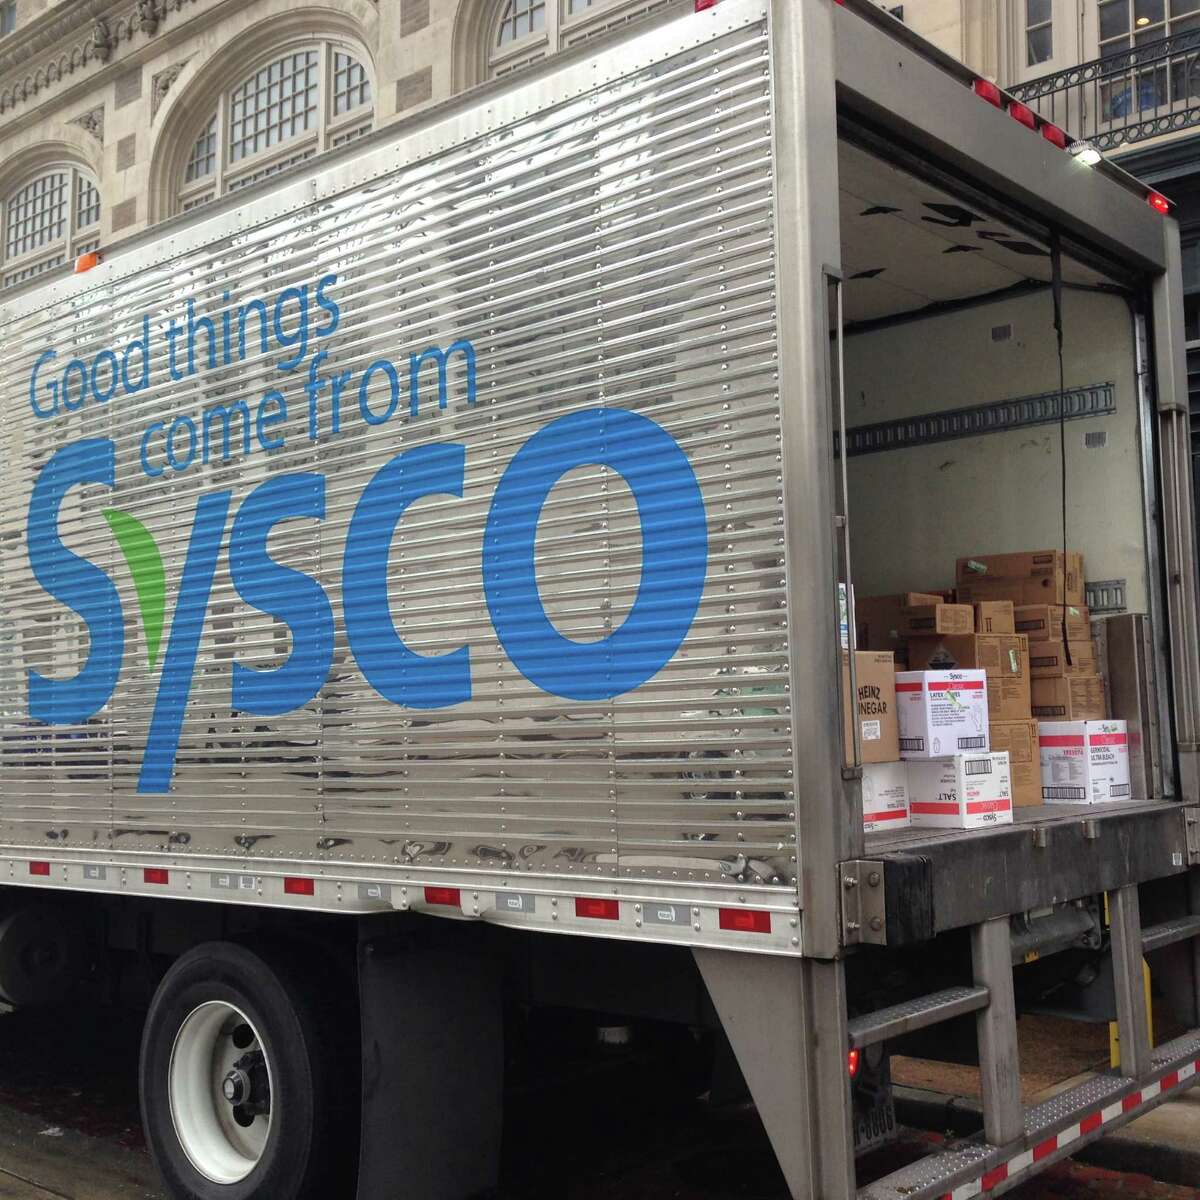 A Sysco truck makes a delivery in downtown Houston.